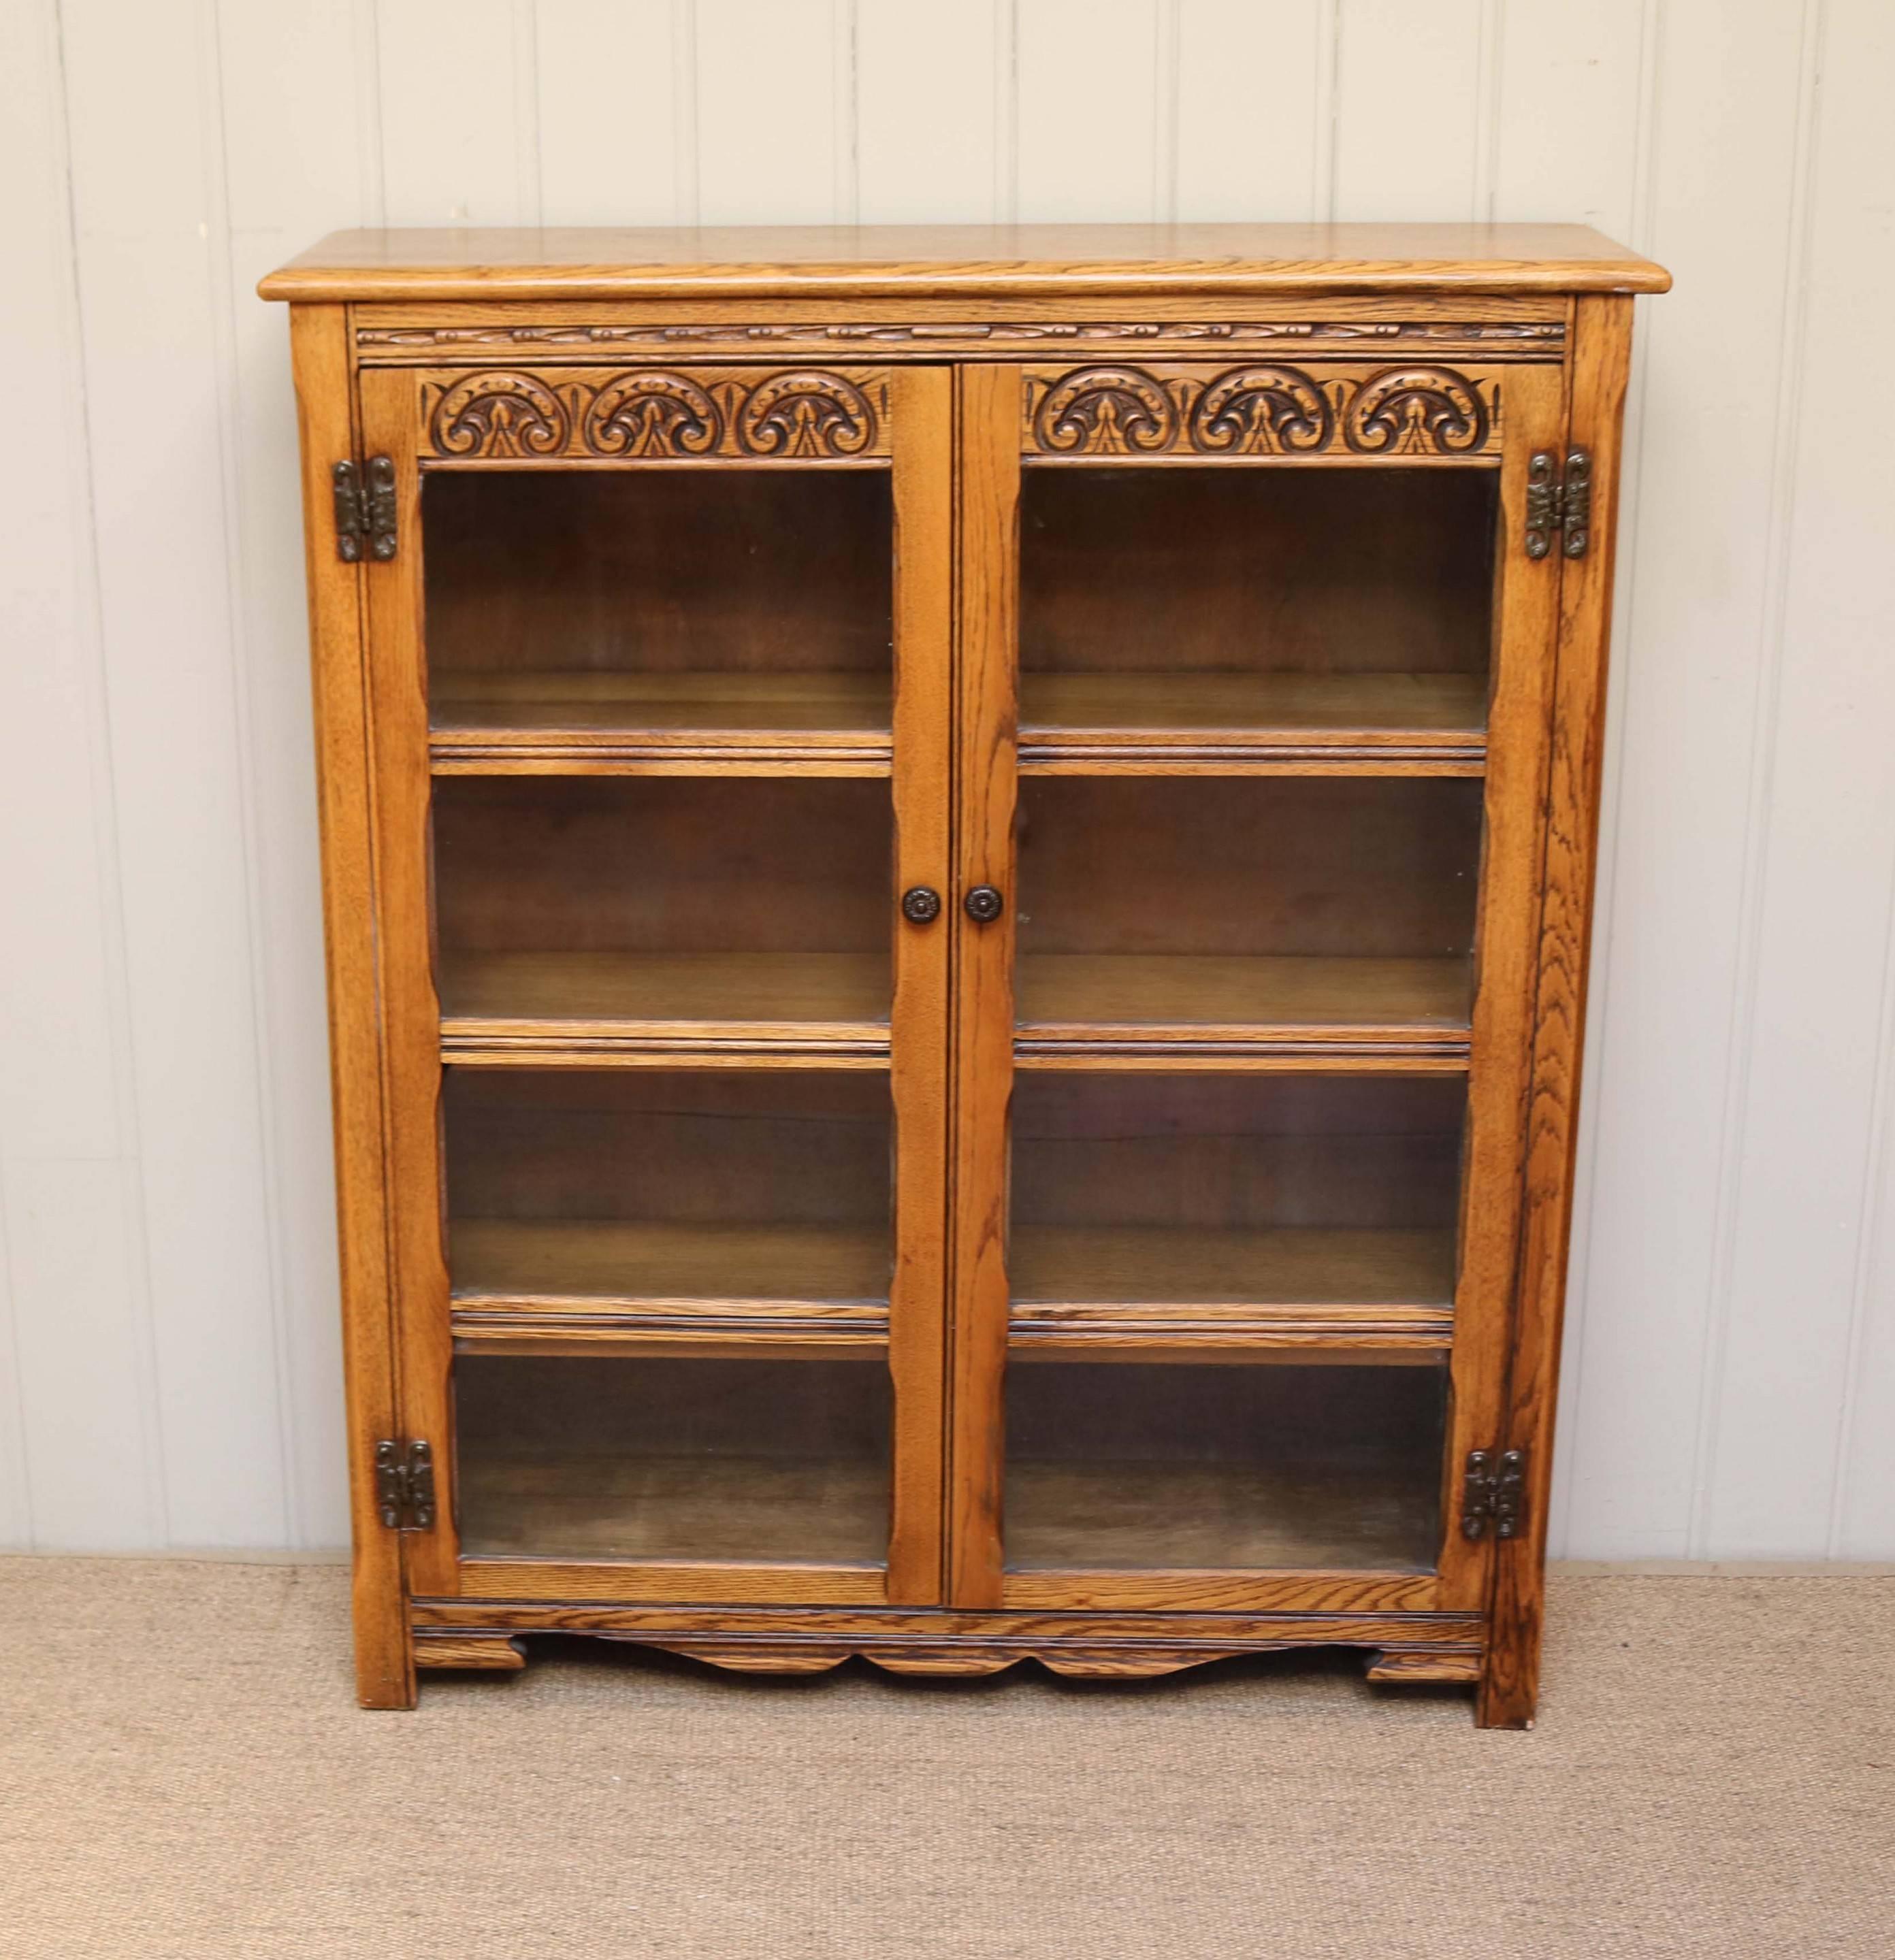 Solid Oak Glazed Bookcase In Good Condition For Sale In Buckinghamshire, GB